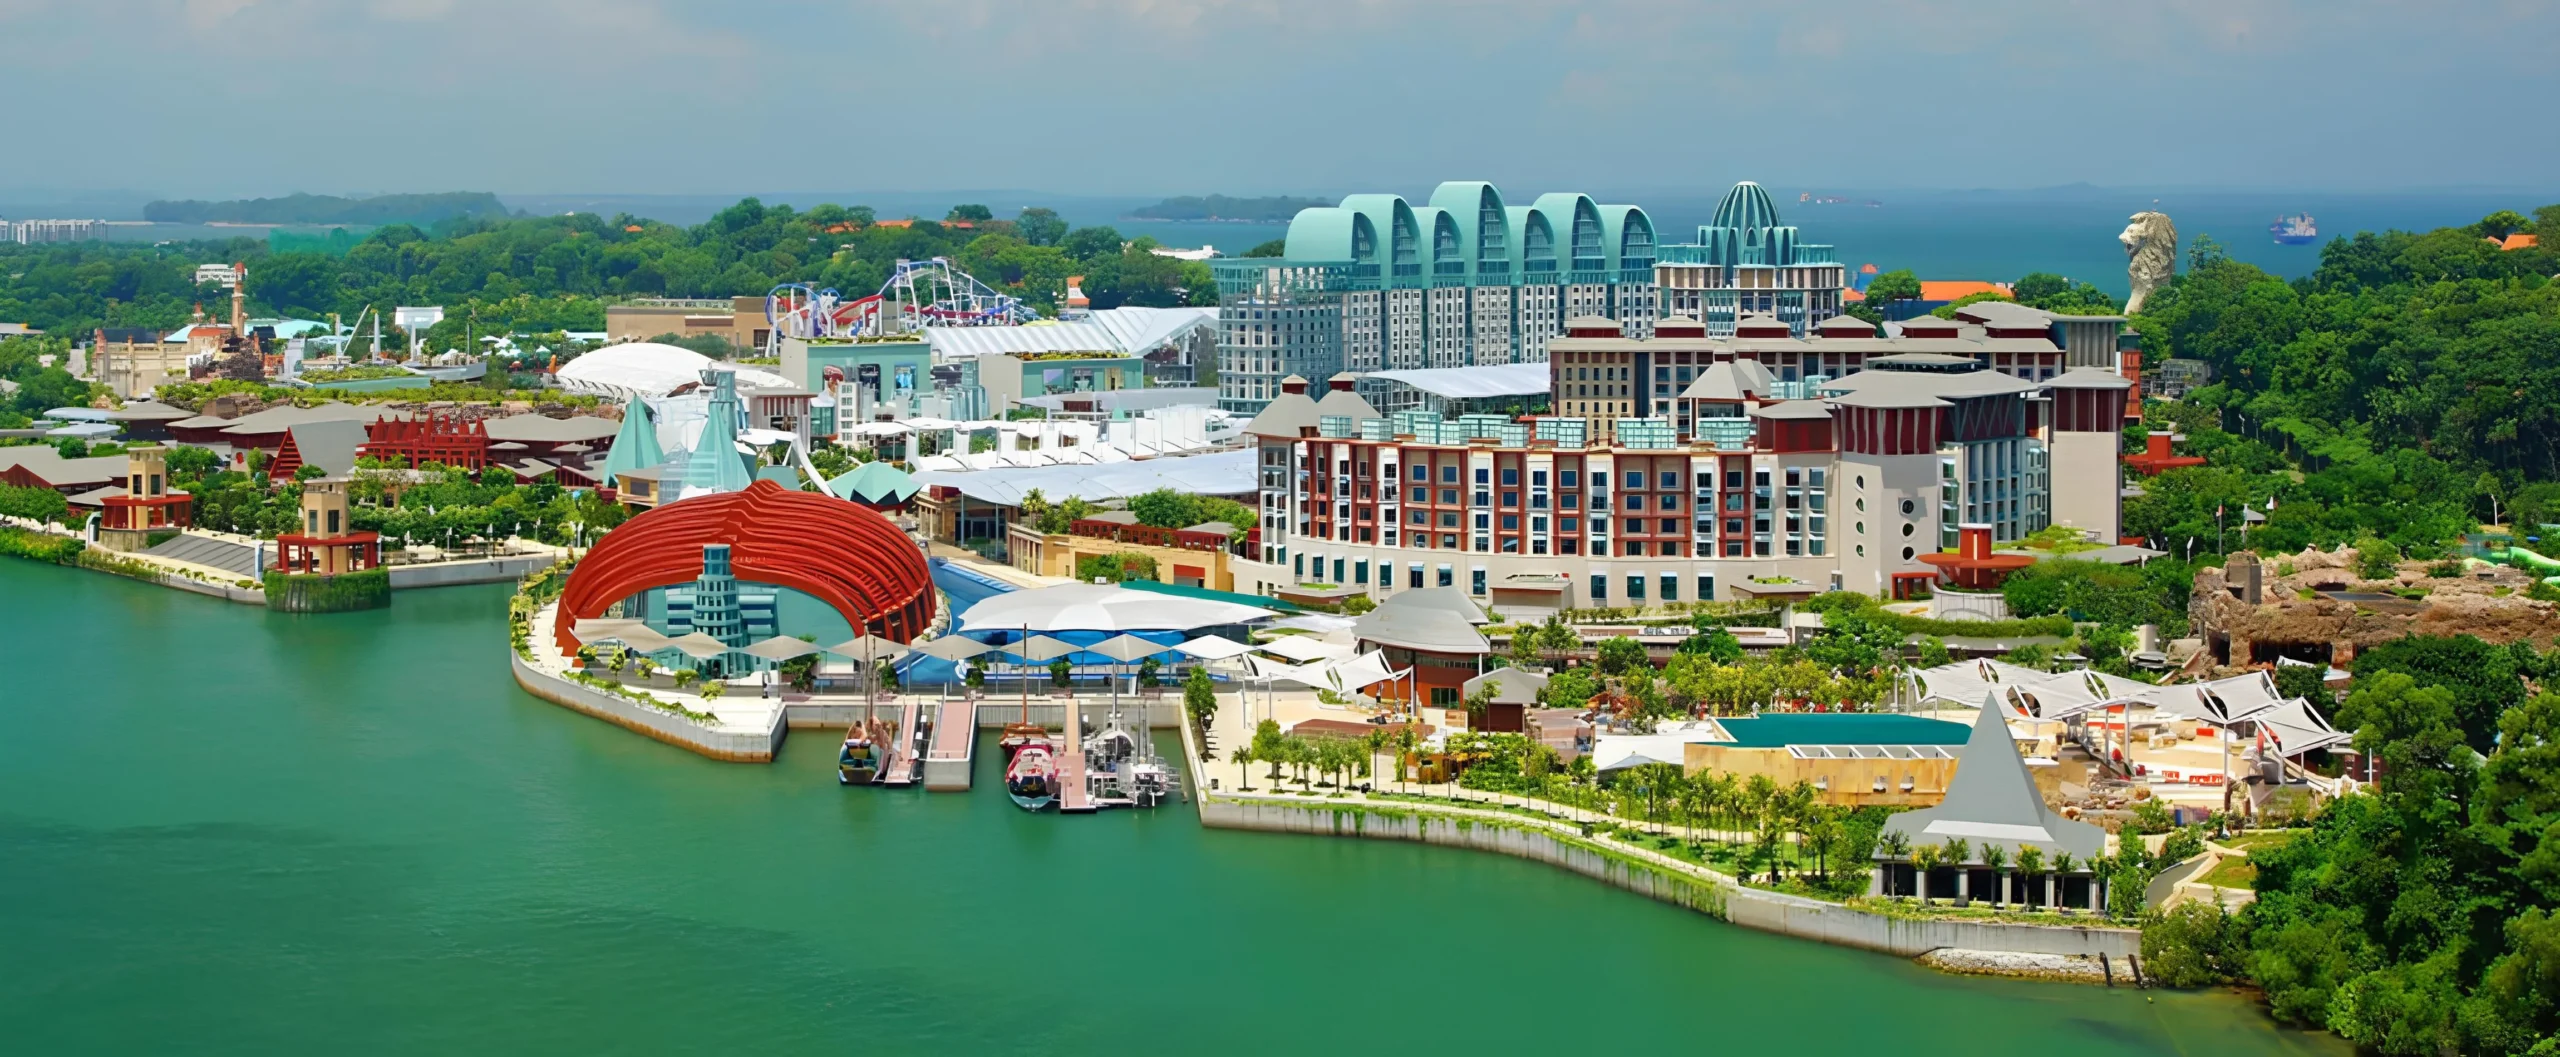 Singapore's best tourist attractions